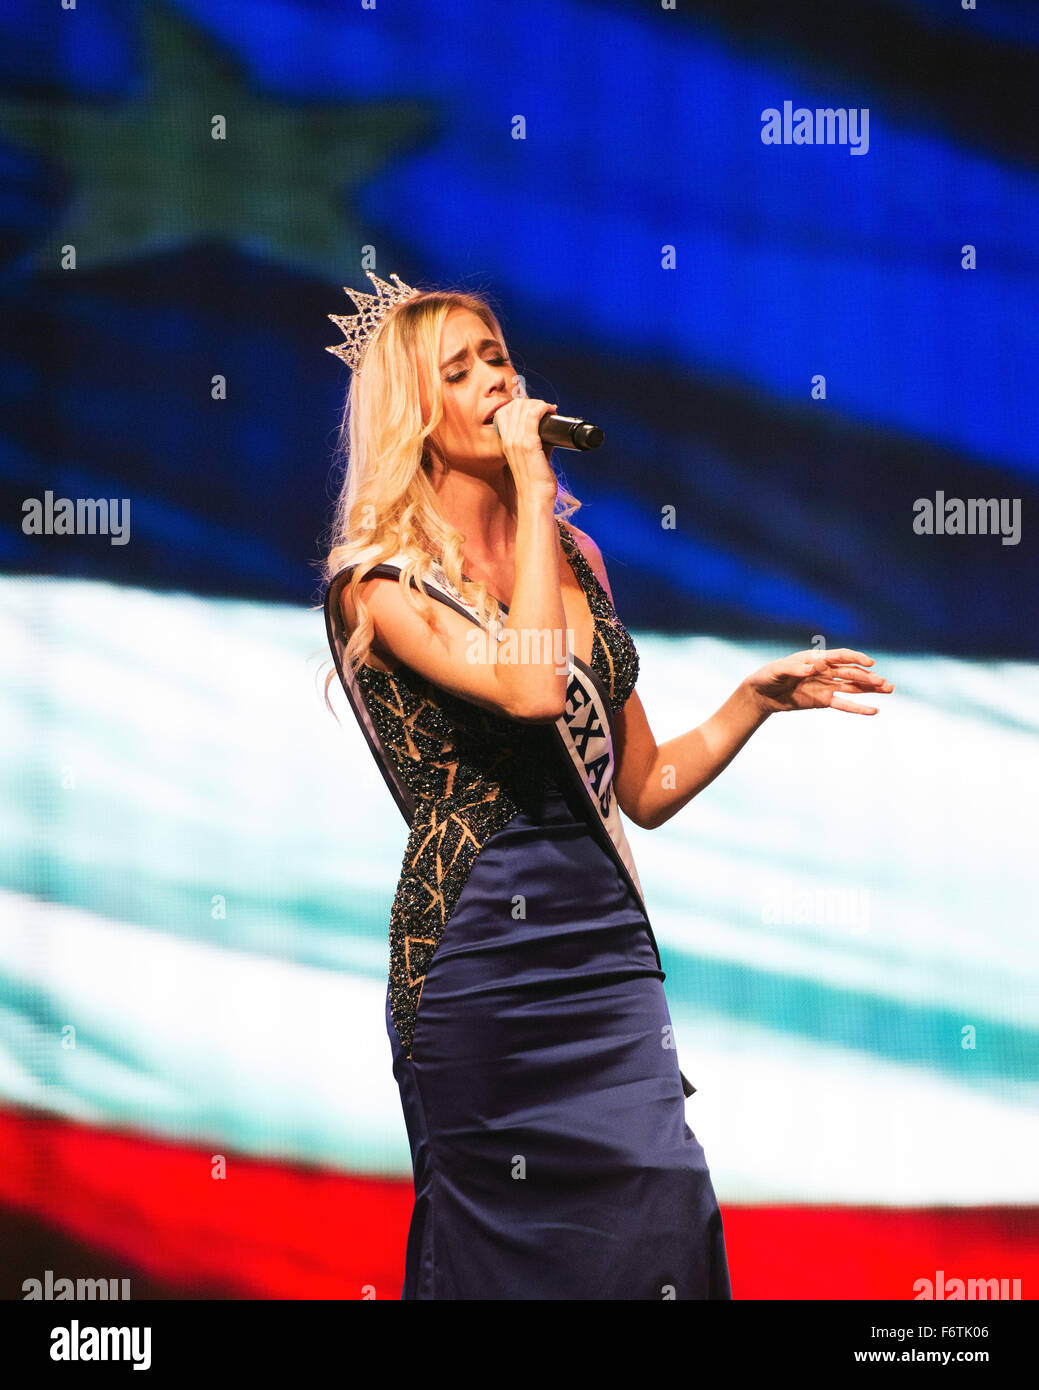 Houston, Texas, USA. 19th November, 2015. November 19, 2015:2015  Miss Texas, Sarah Marie Blanon sings 'America The Beautiful' at the Opening ceremonies of the World Weightlifting Championships in  Houston, Texas. Credit:  Brent Clark/Alamy Live News Stock Photo